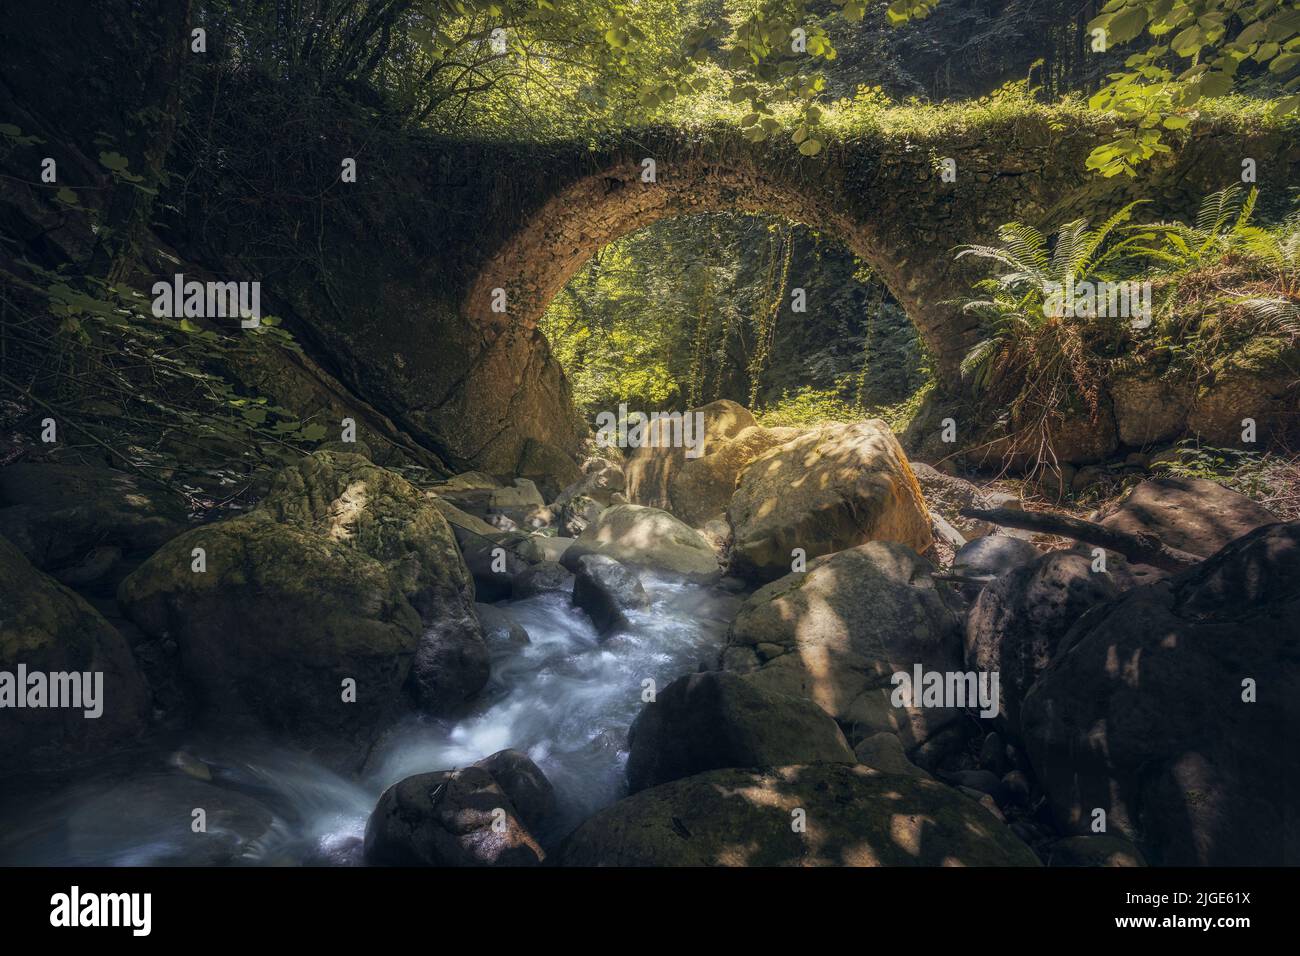 Fairy Tale Deep Forest with an Enchanting Stone Bridge Stock Photo